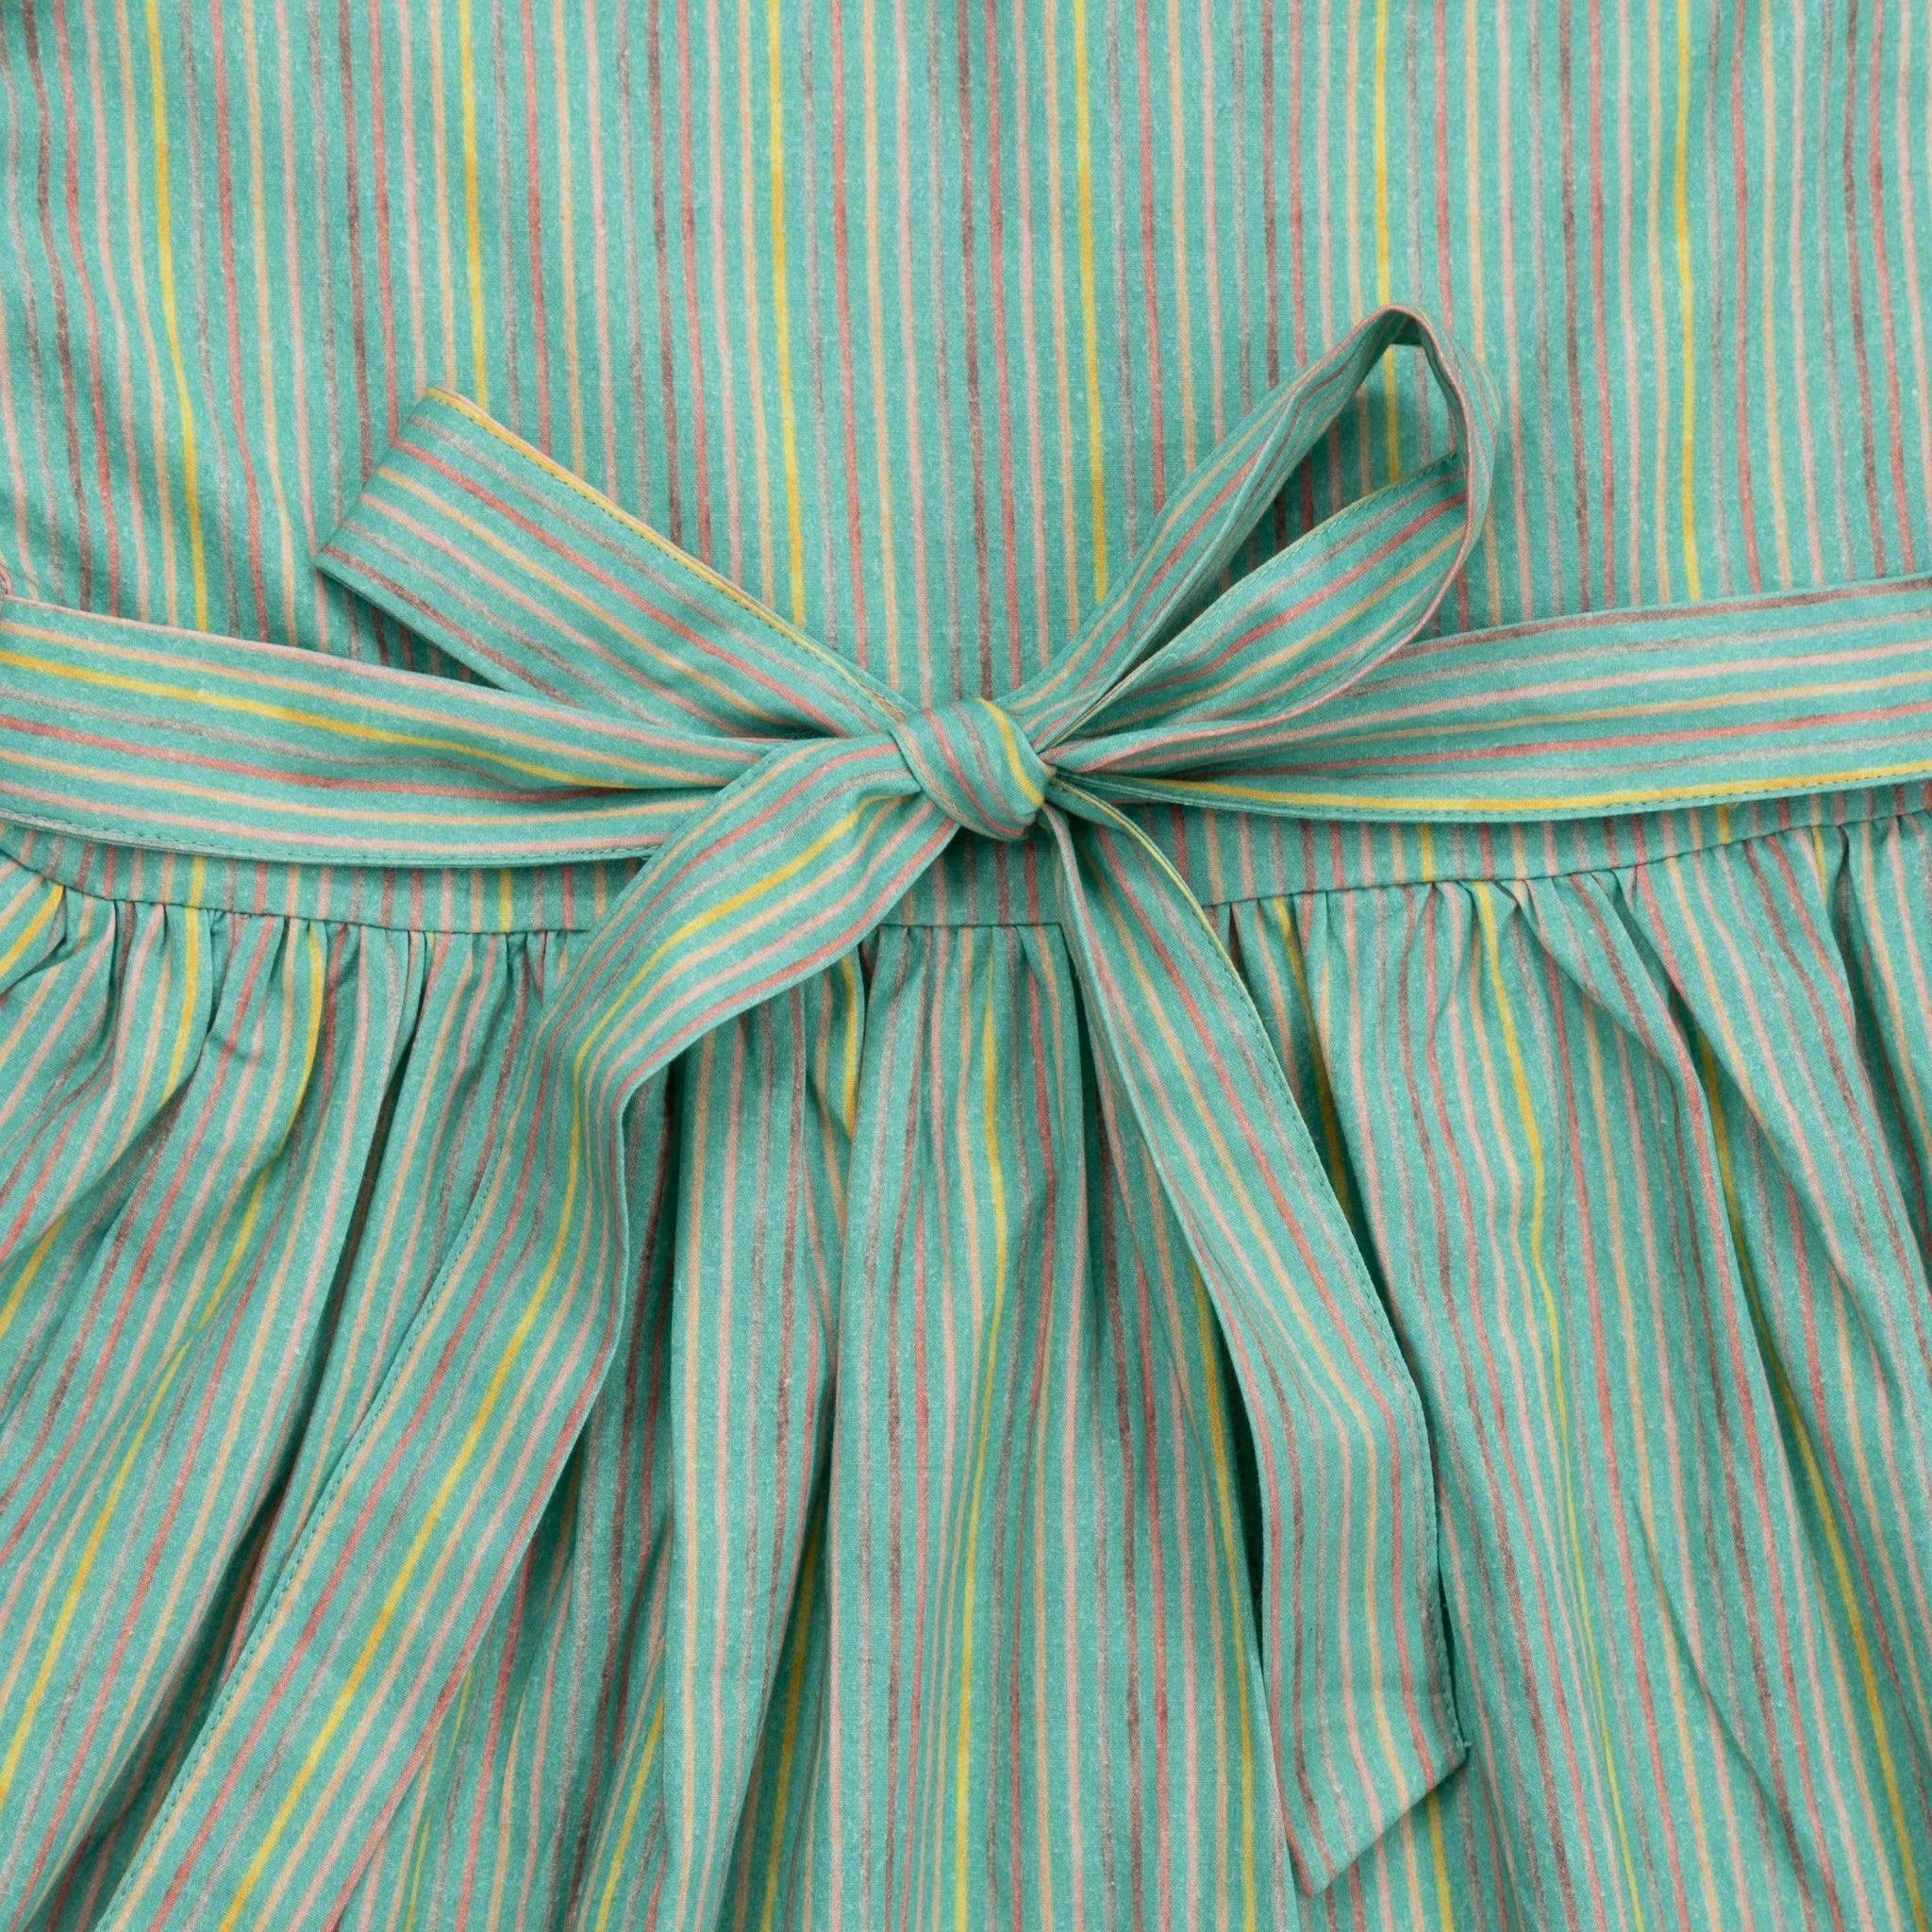 Close-up of a Karee green and orange striped fabric with a neatly tied bow at the center.